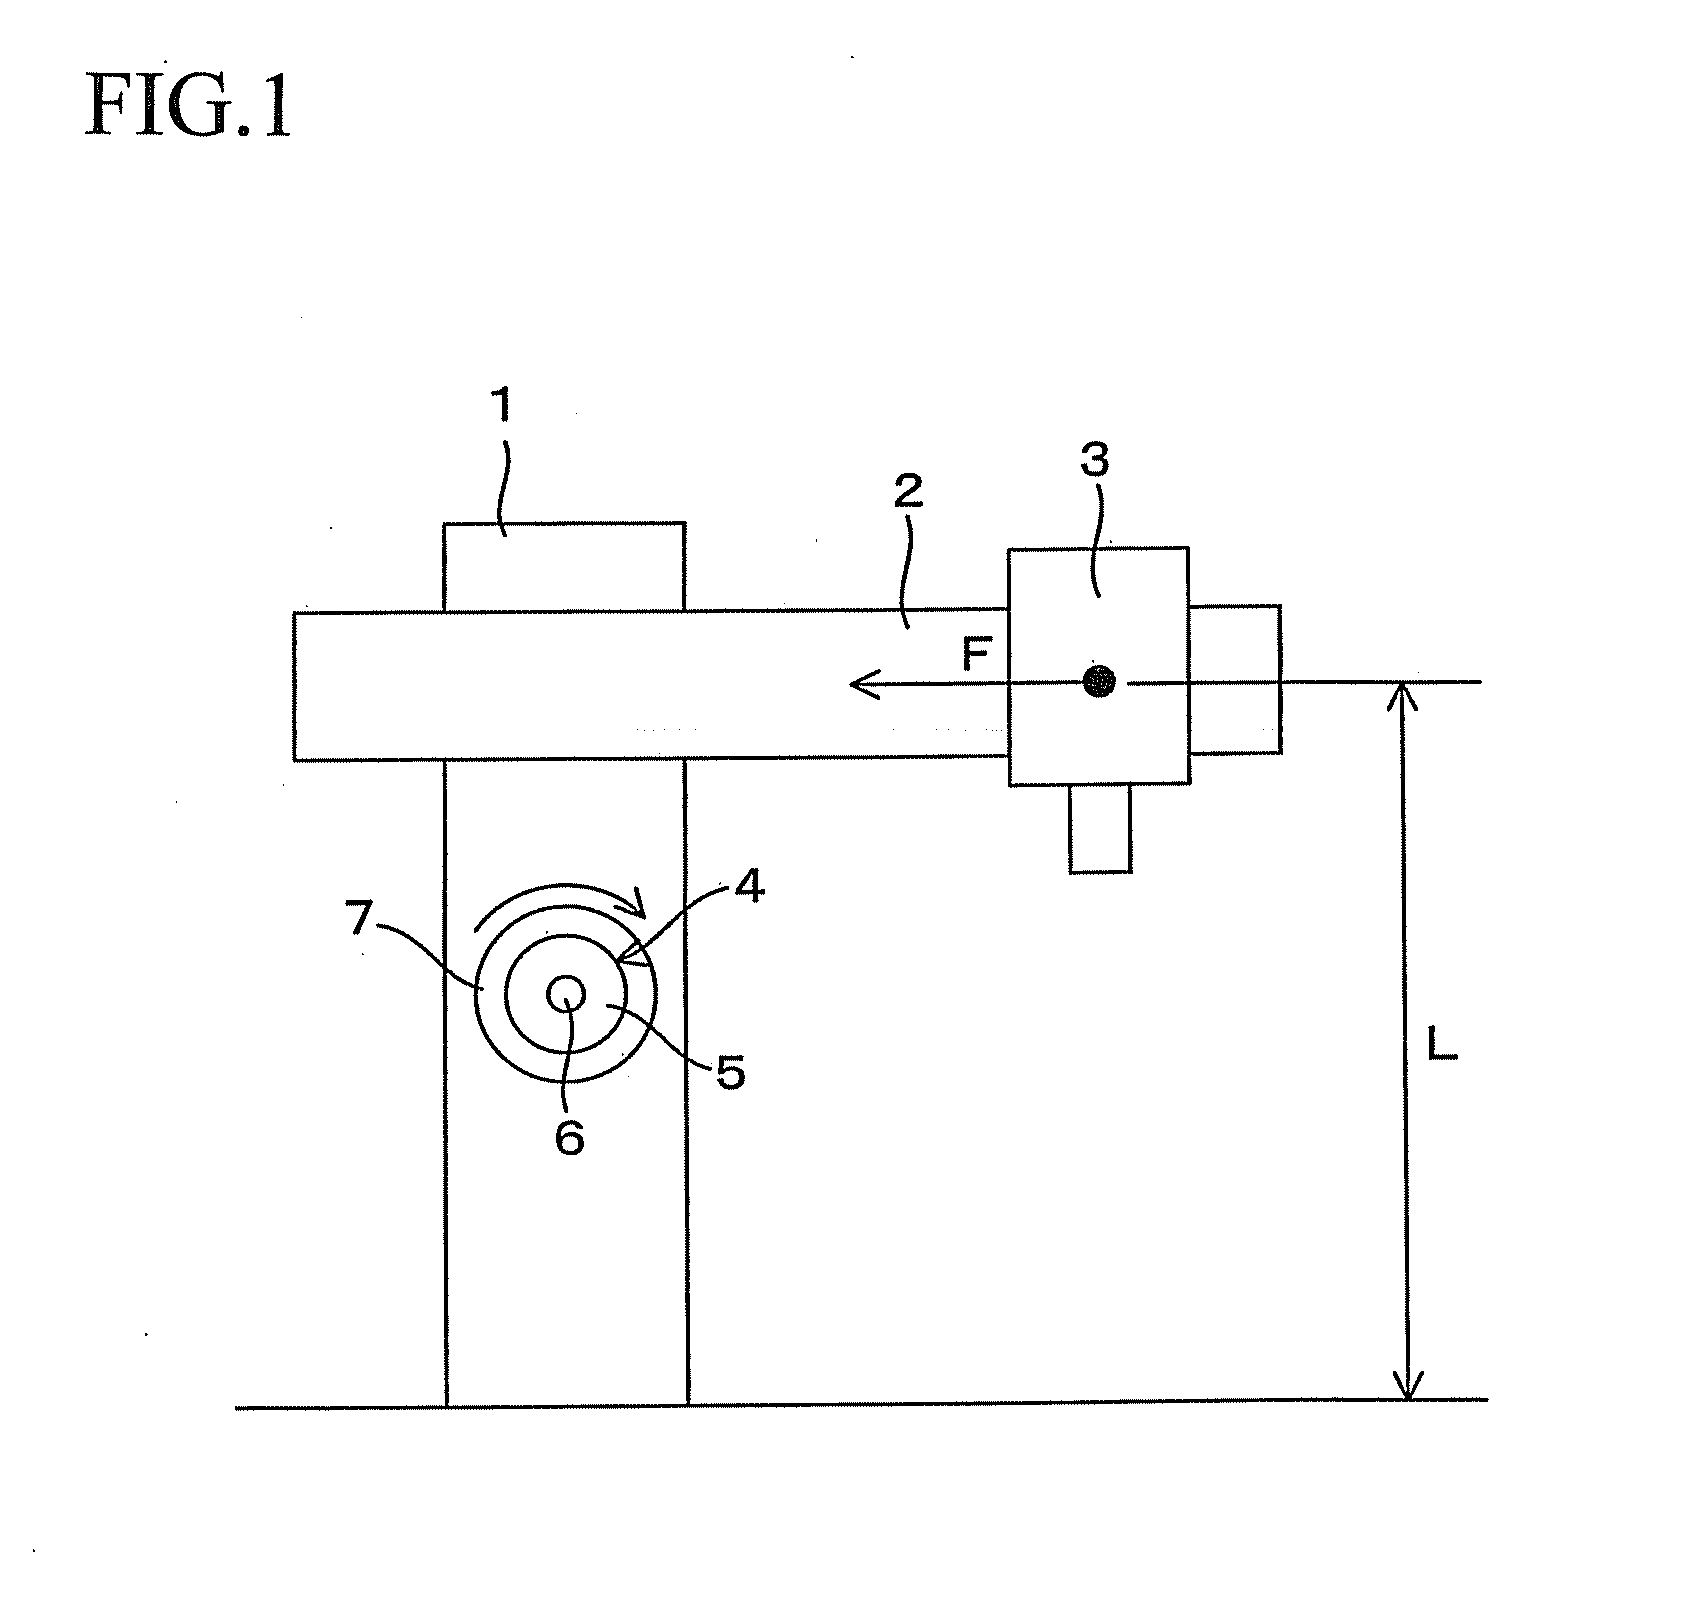 Method for controlling deflection in structural member